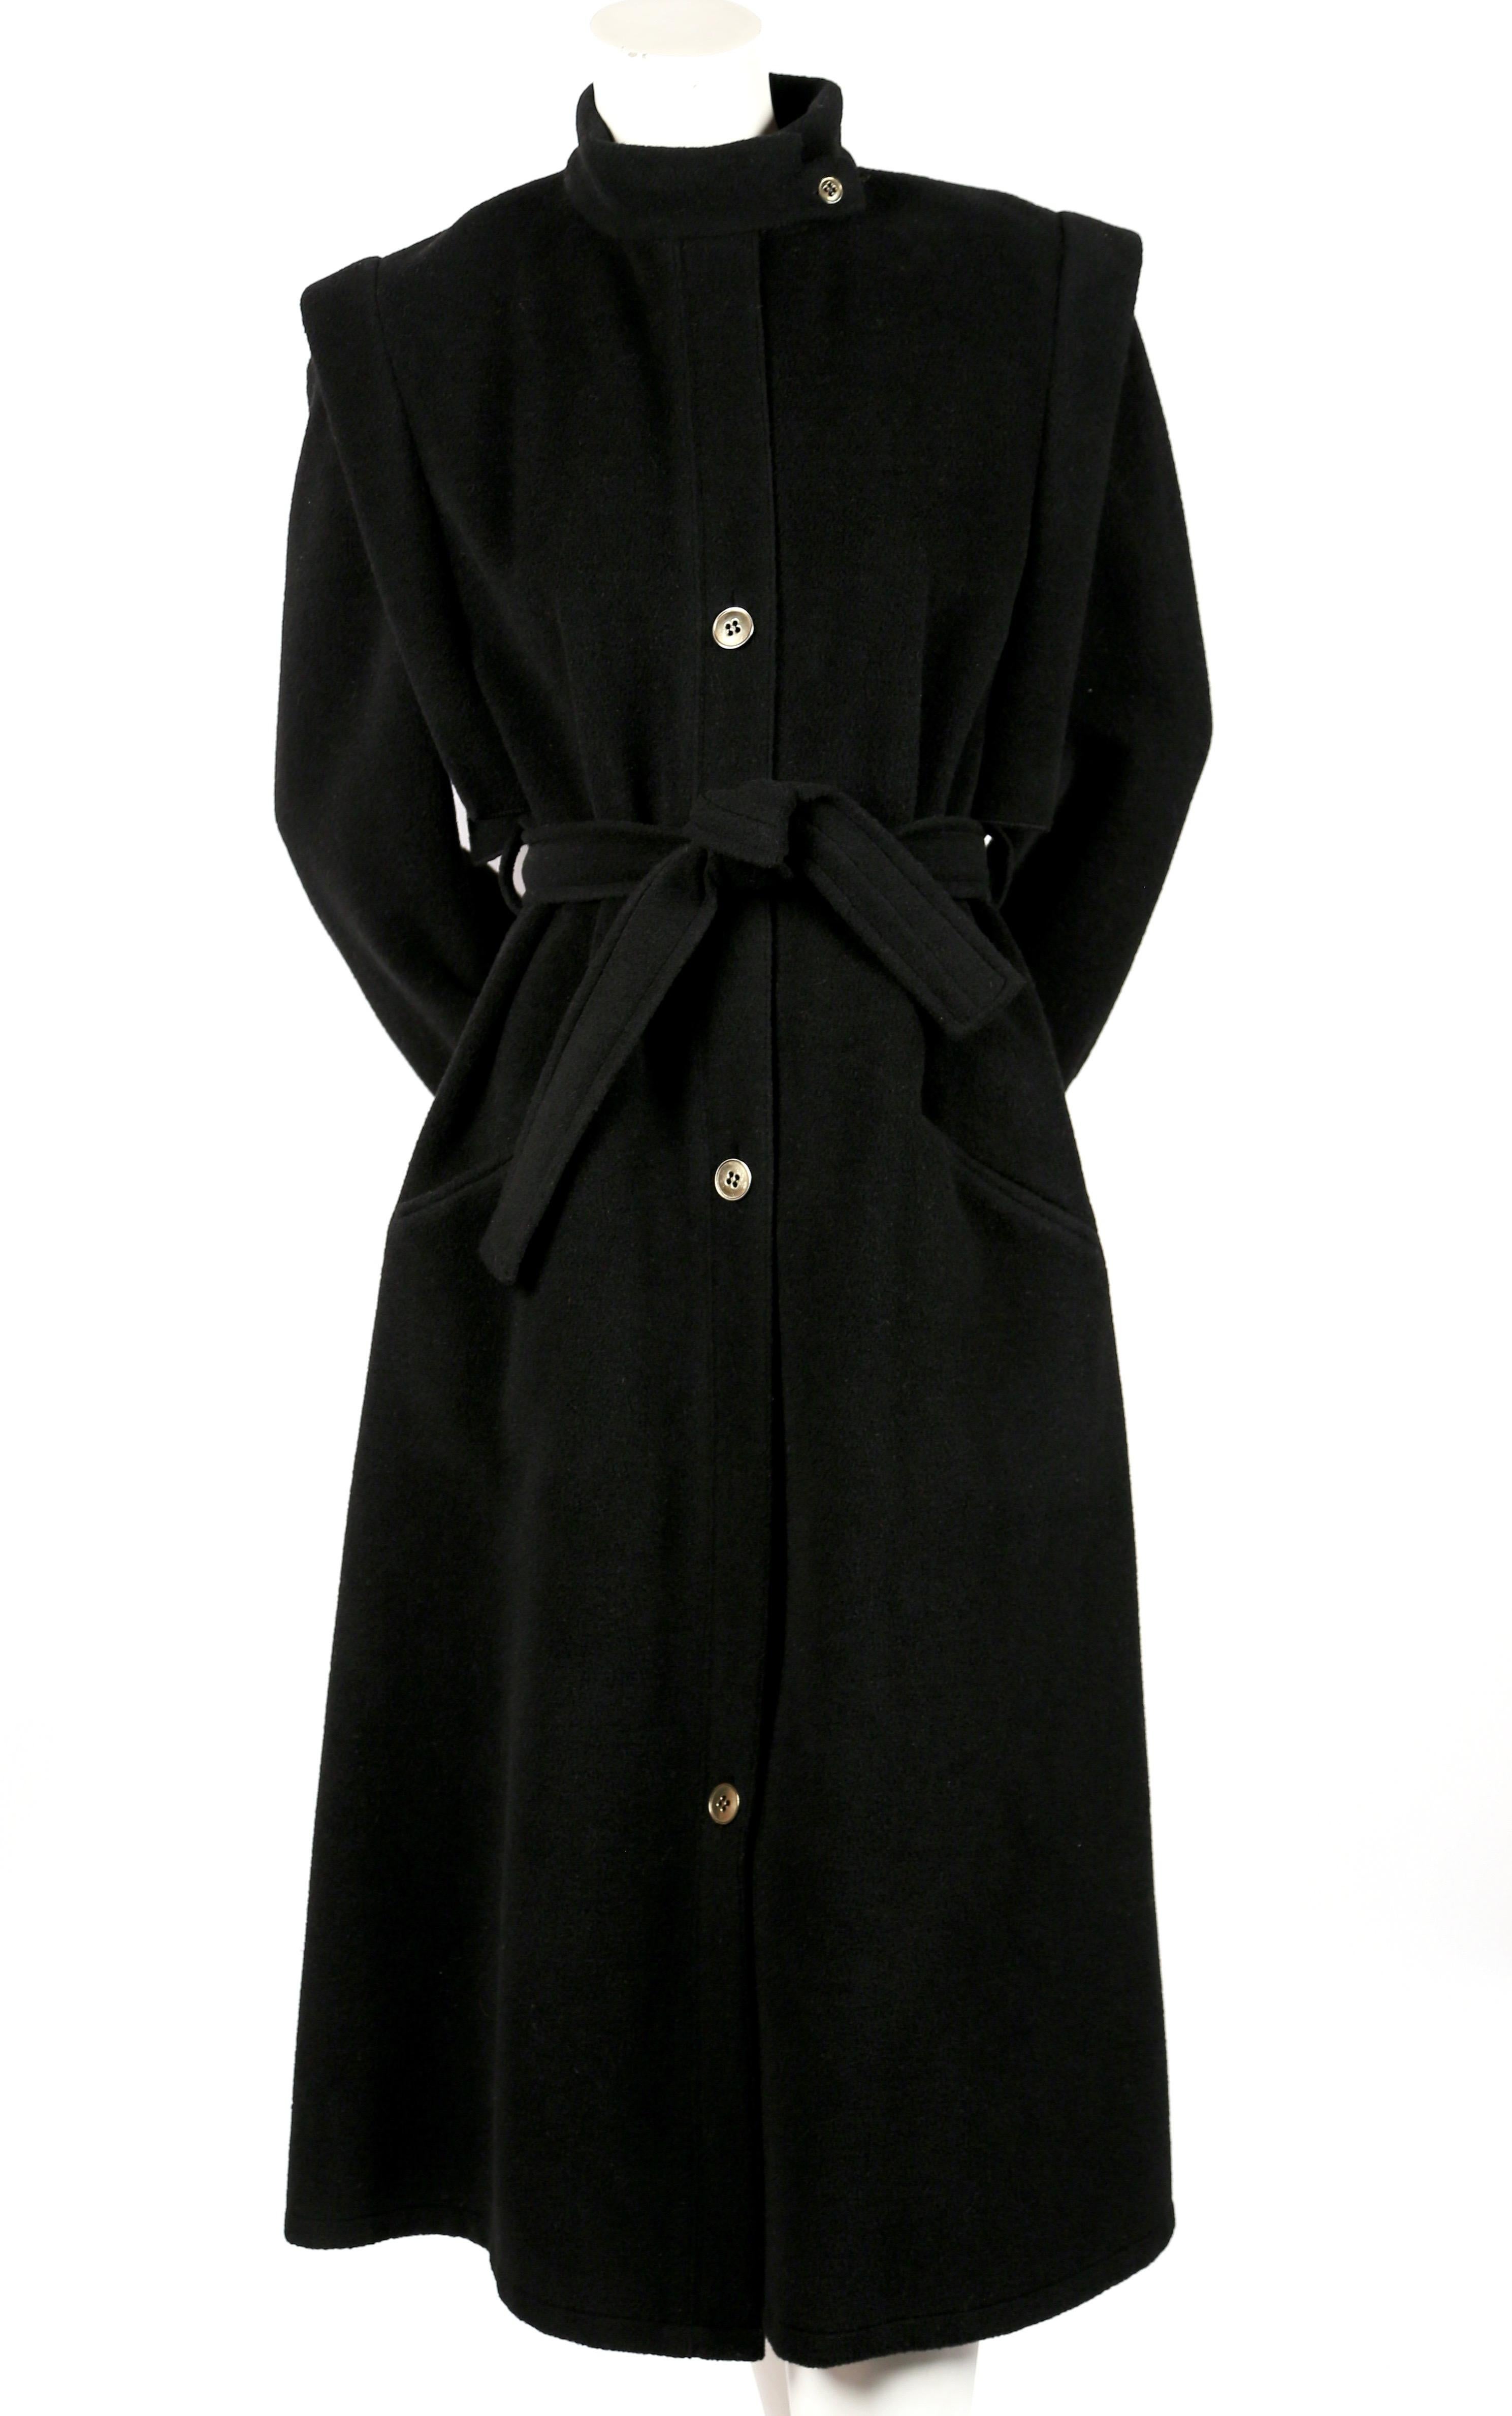 Uniquely shaped, black wool coat with structured shoulders and metal buttons designed by Sonia Rykiel for Henri Bendel. No size is indicated however this would fit a size 2-6 depending on fit. For reference, the coat was photographed on a size 2